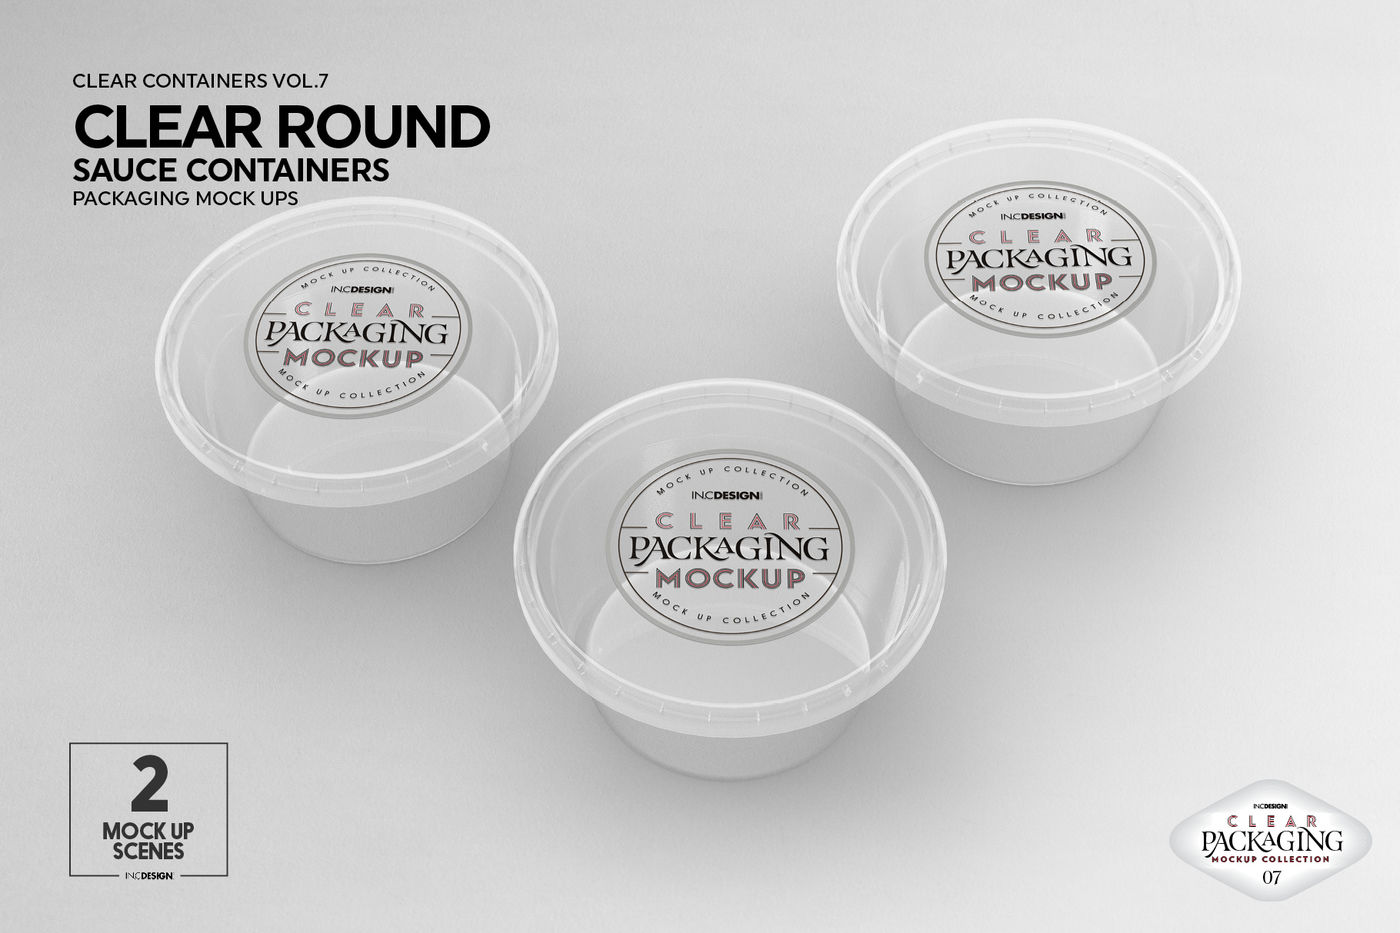 Download Clear Round Sauce Containers Packaging MockUp By INC Design Studio | TheHungryJPEG.com